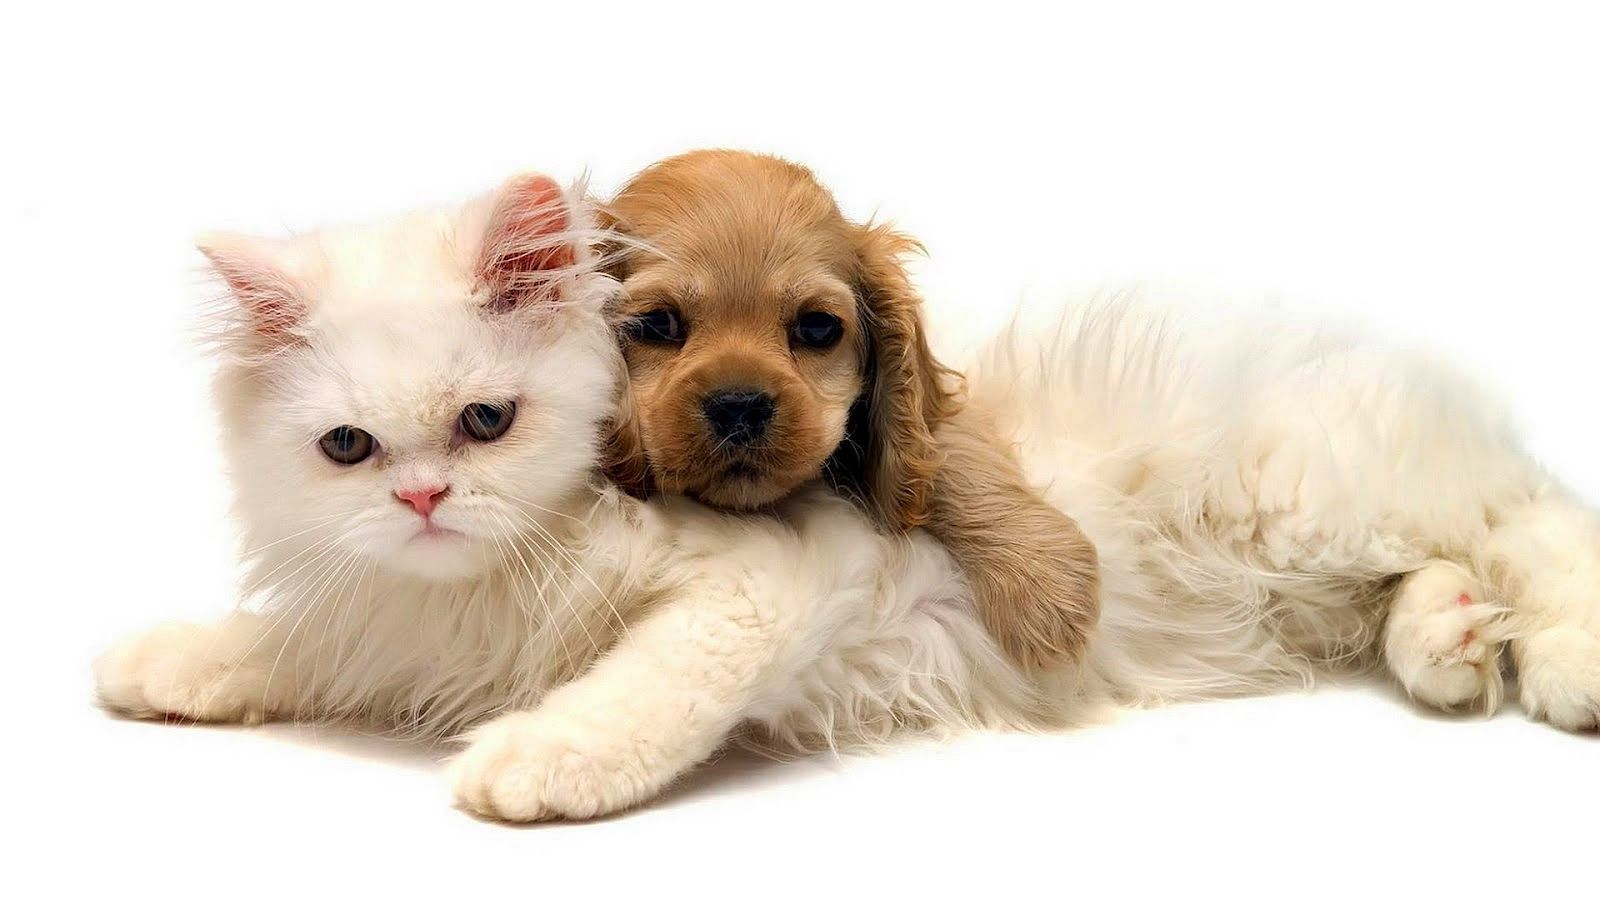 Cute Cats and Dogs Wallpapers on WallpaperDog